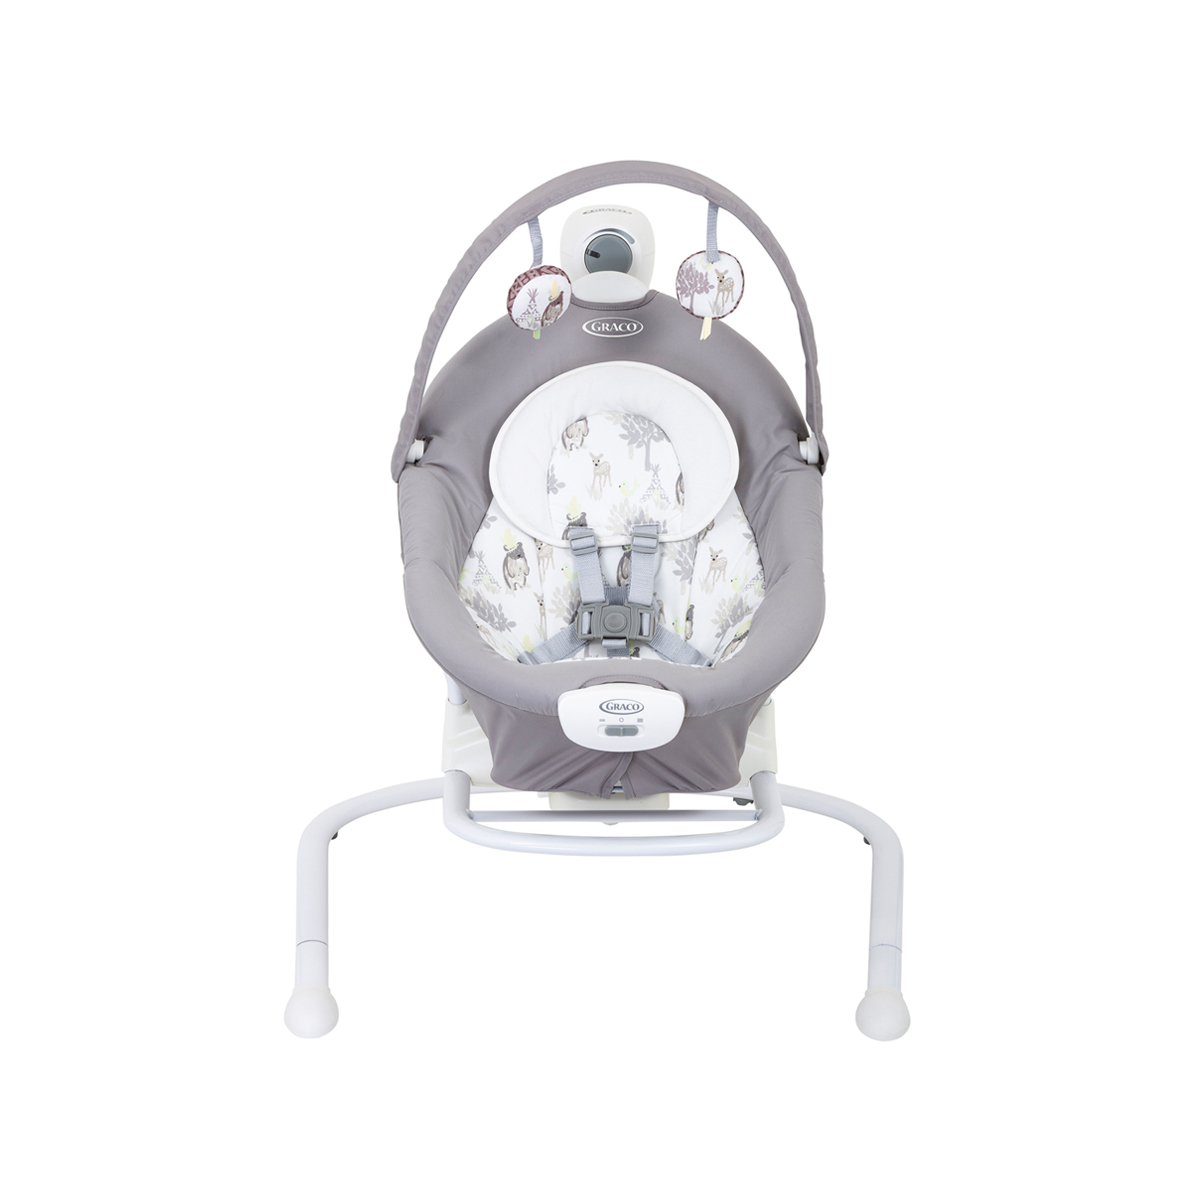 Graco Duet Sway™ front angle